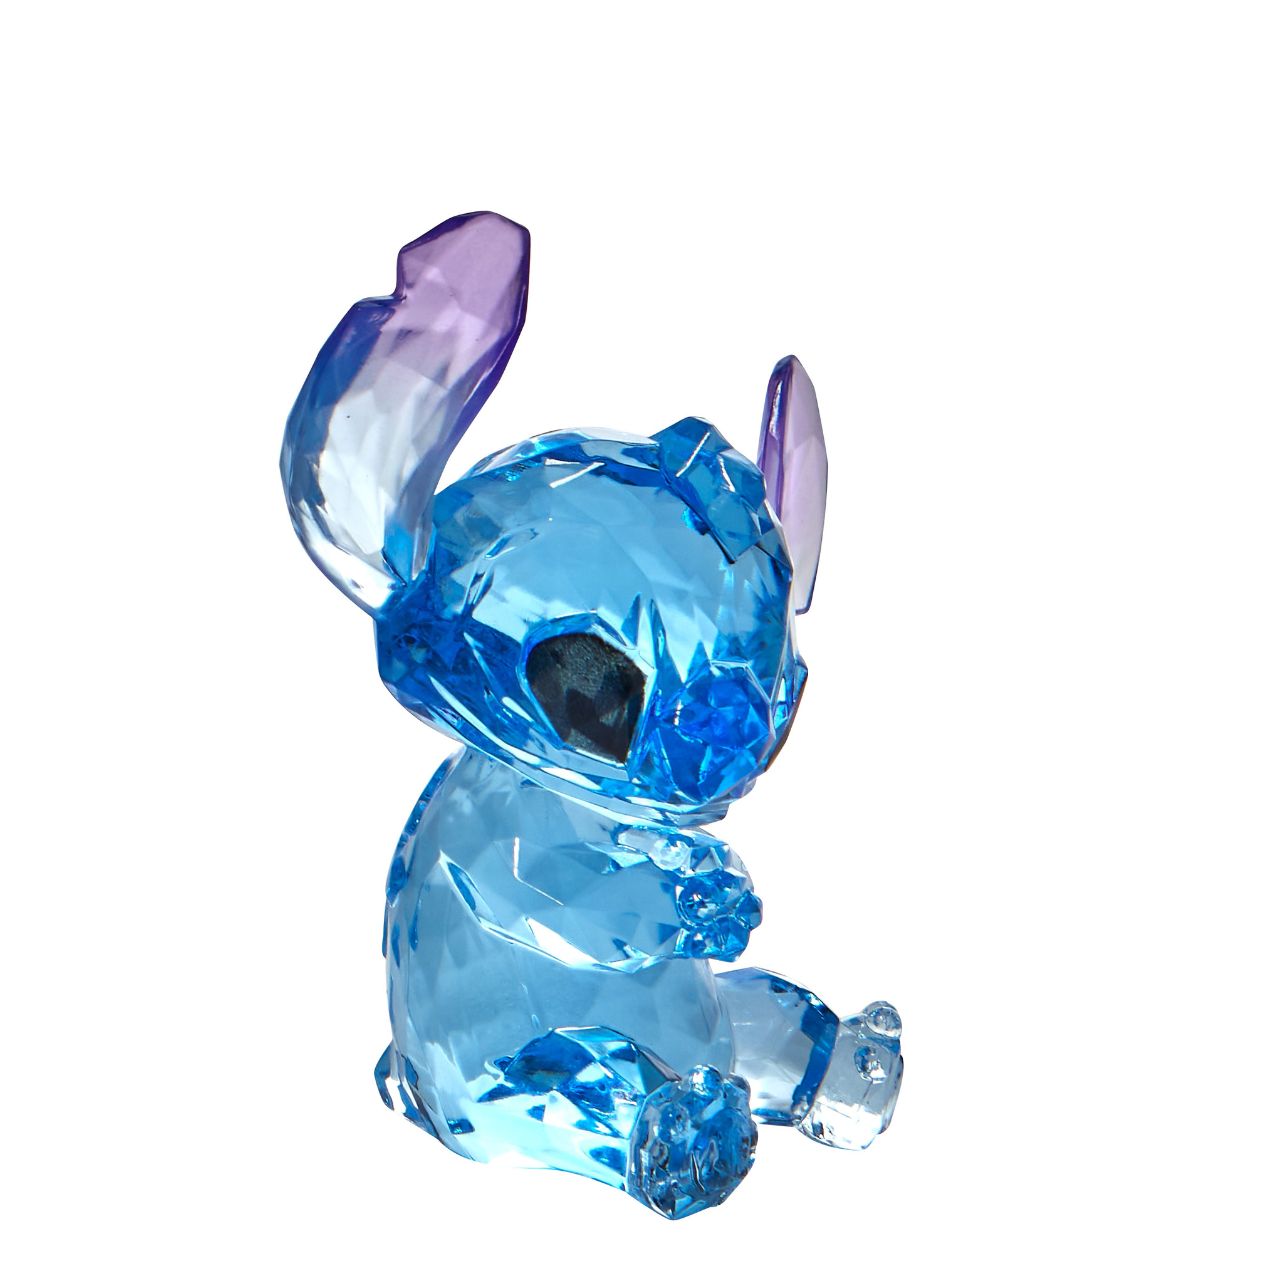 Disney Stitch Facets Figurine  This "gem cut" acrylic sculpture reflects Stitch's sparkling personality and childlike charm. Presented in a branded window gift box. Not a toy or children's product. Intended for adults only.